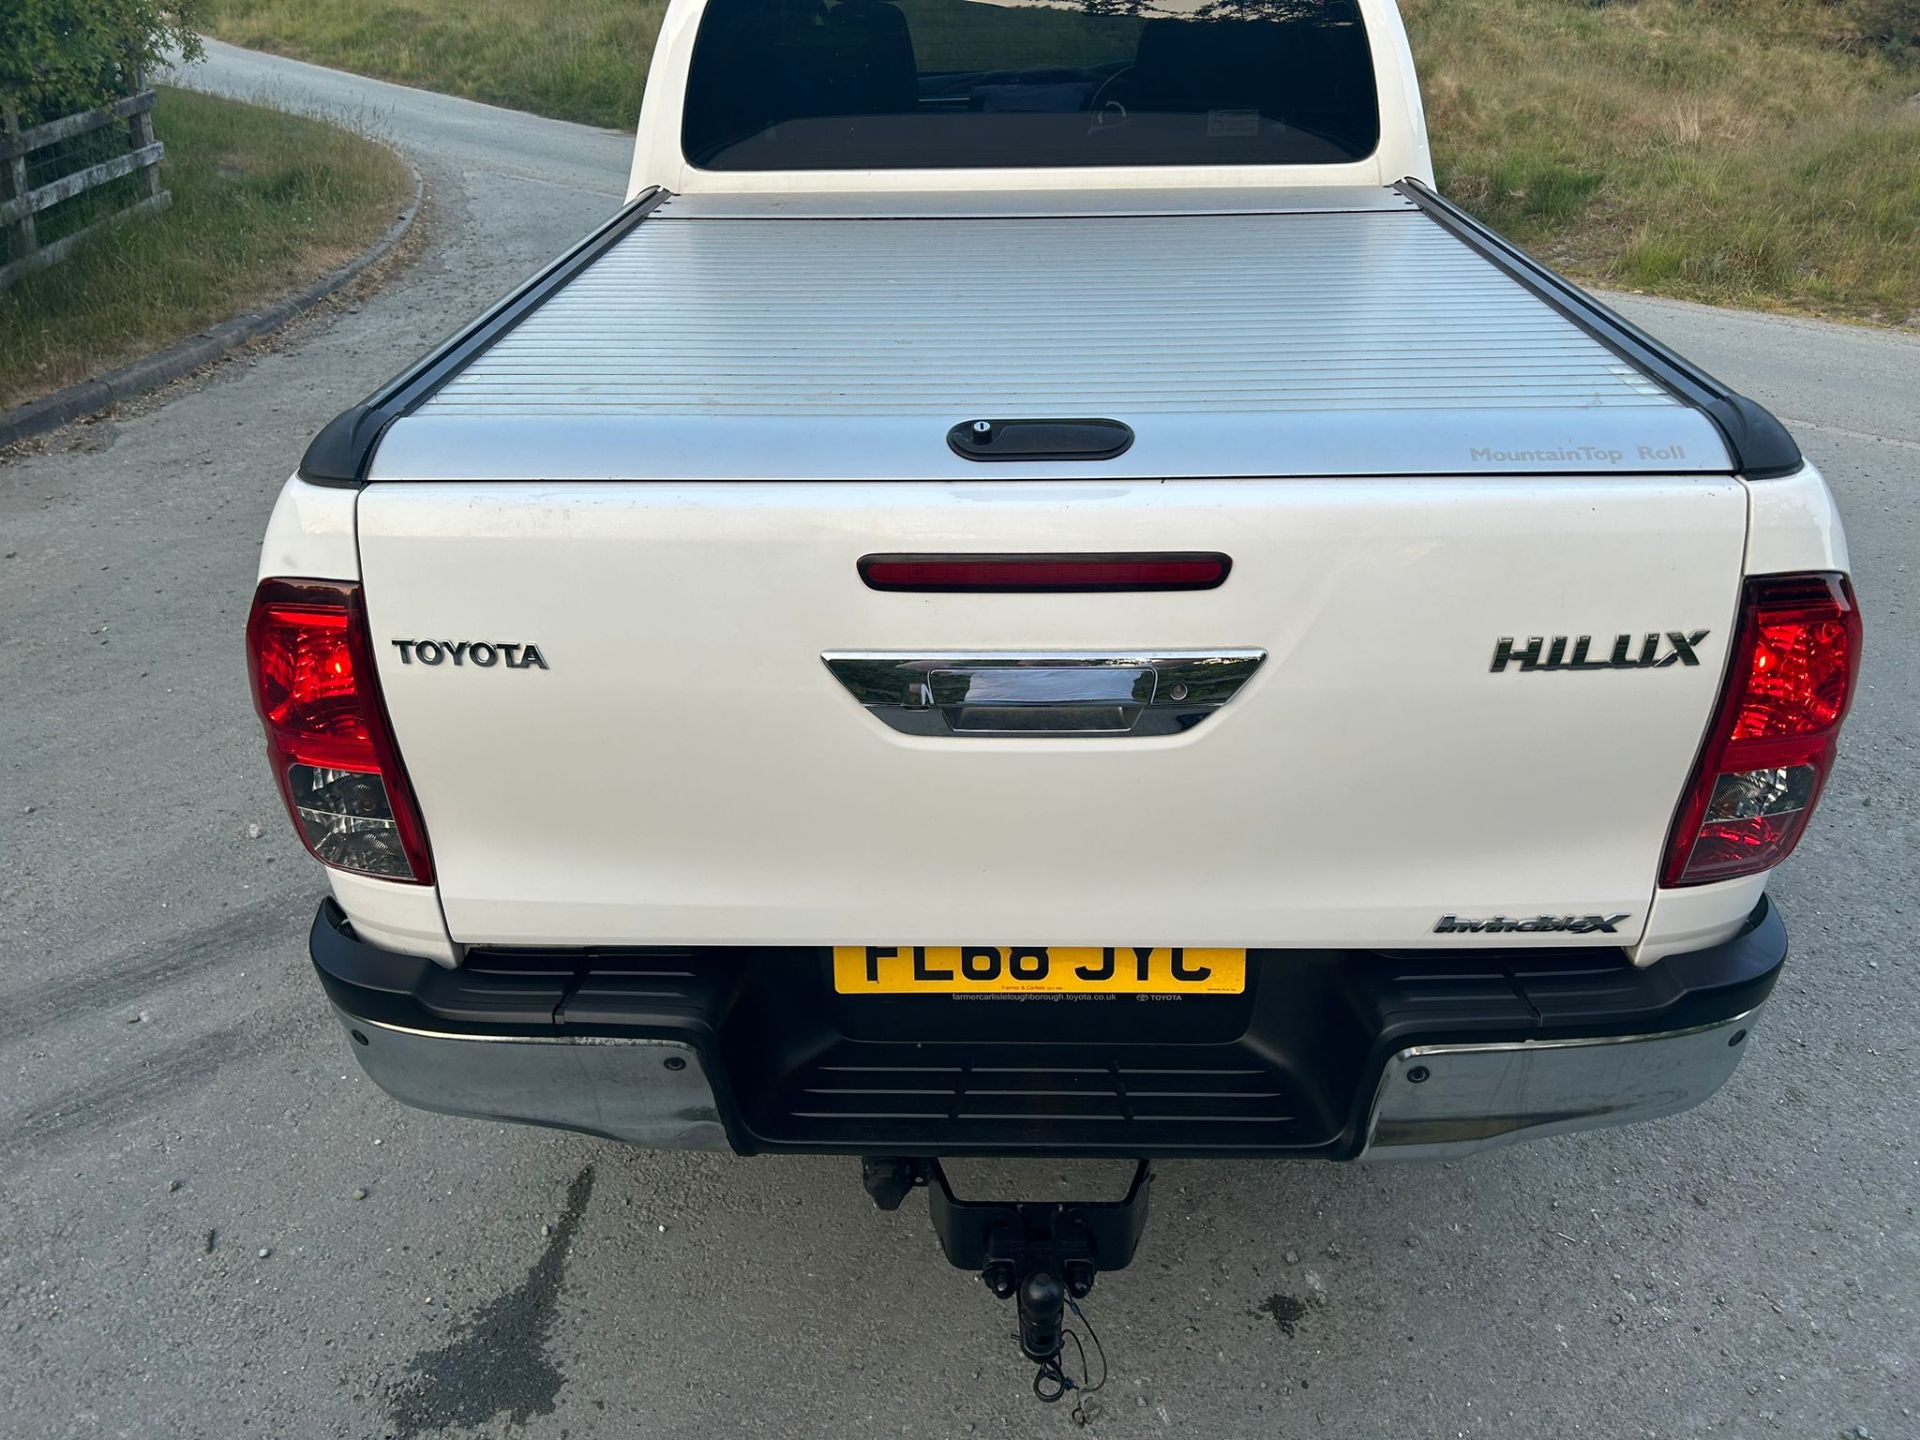 AUTOMATIC 2018 TOYOTA HILUX LIMITED EDITION FACELIFT ROLLER SHUTTER - Image 8 of 18